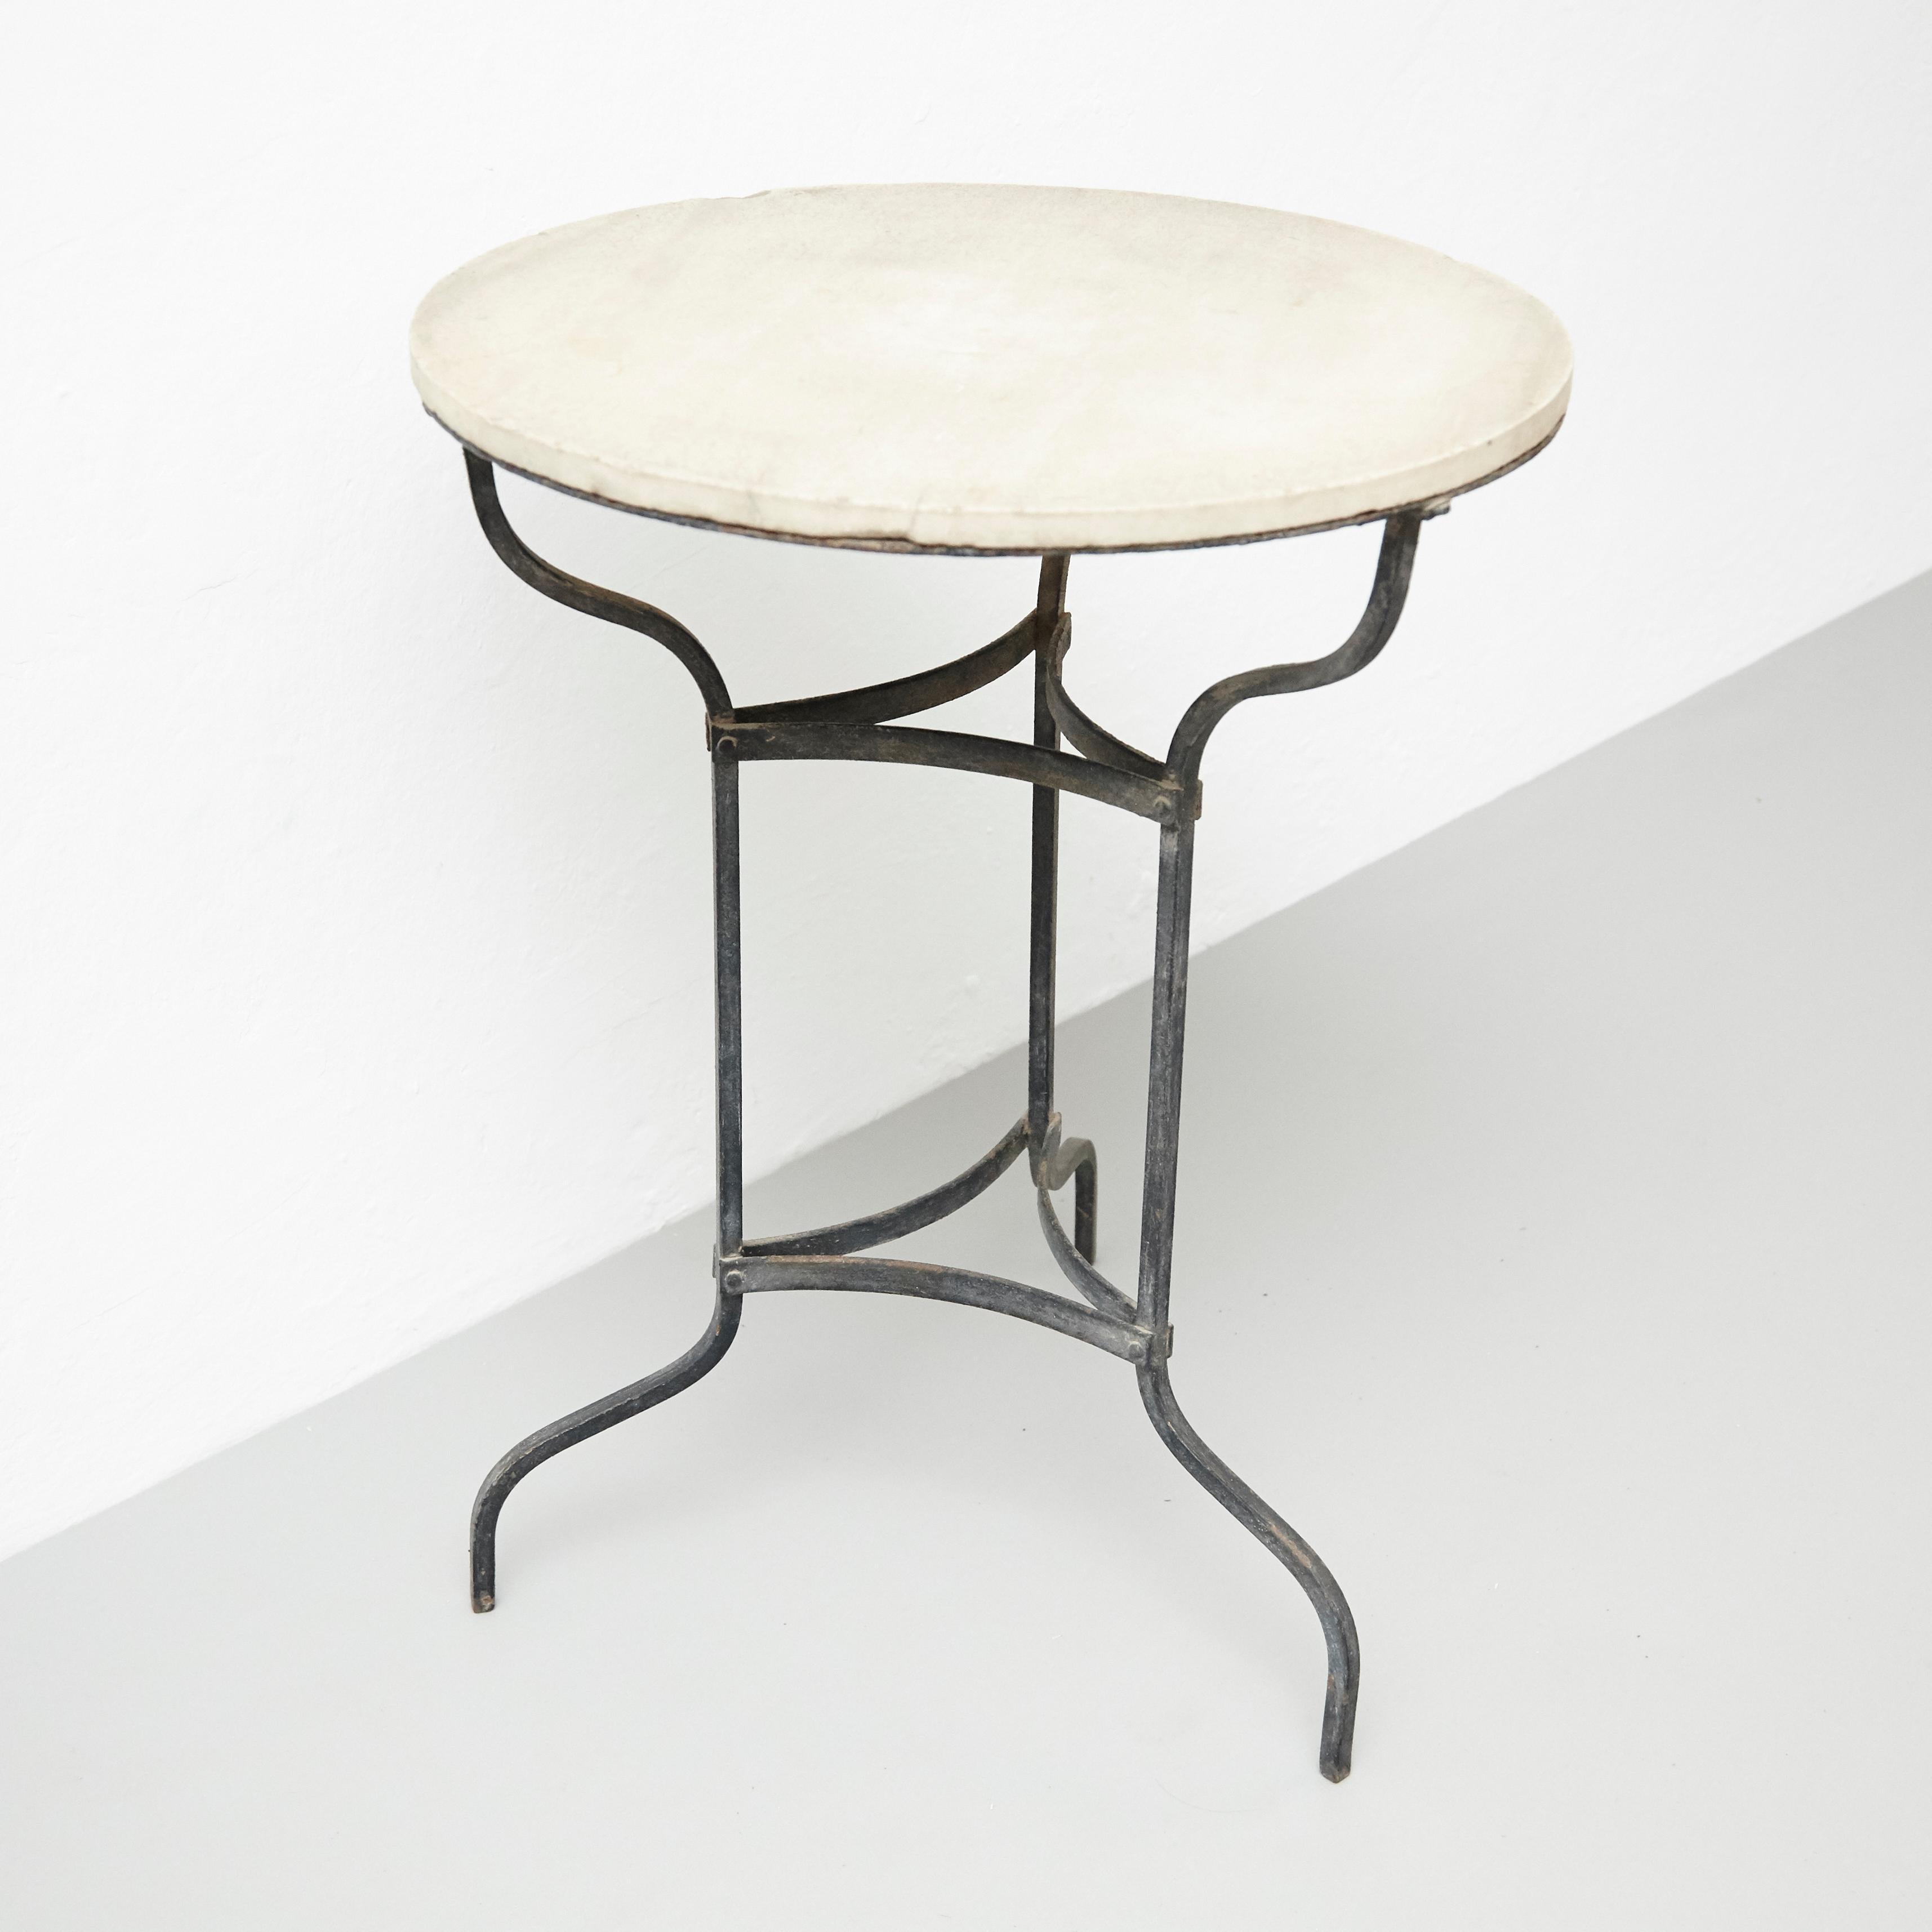 Bistrot metal and marble French table, circa 1920.
By unknown artisan, France.

In original condition, with minor wear consistent with age and use, preserving a beautiful patina.

Materials:
Marble
Metal

Dimensions:
D 60 cm x W 60 cm x H